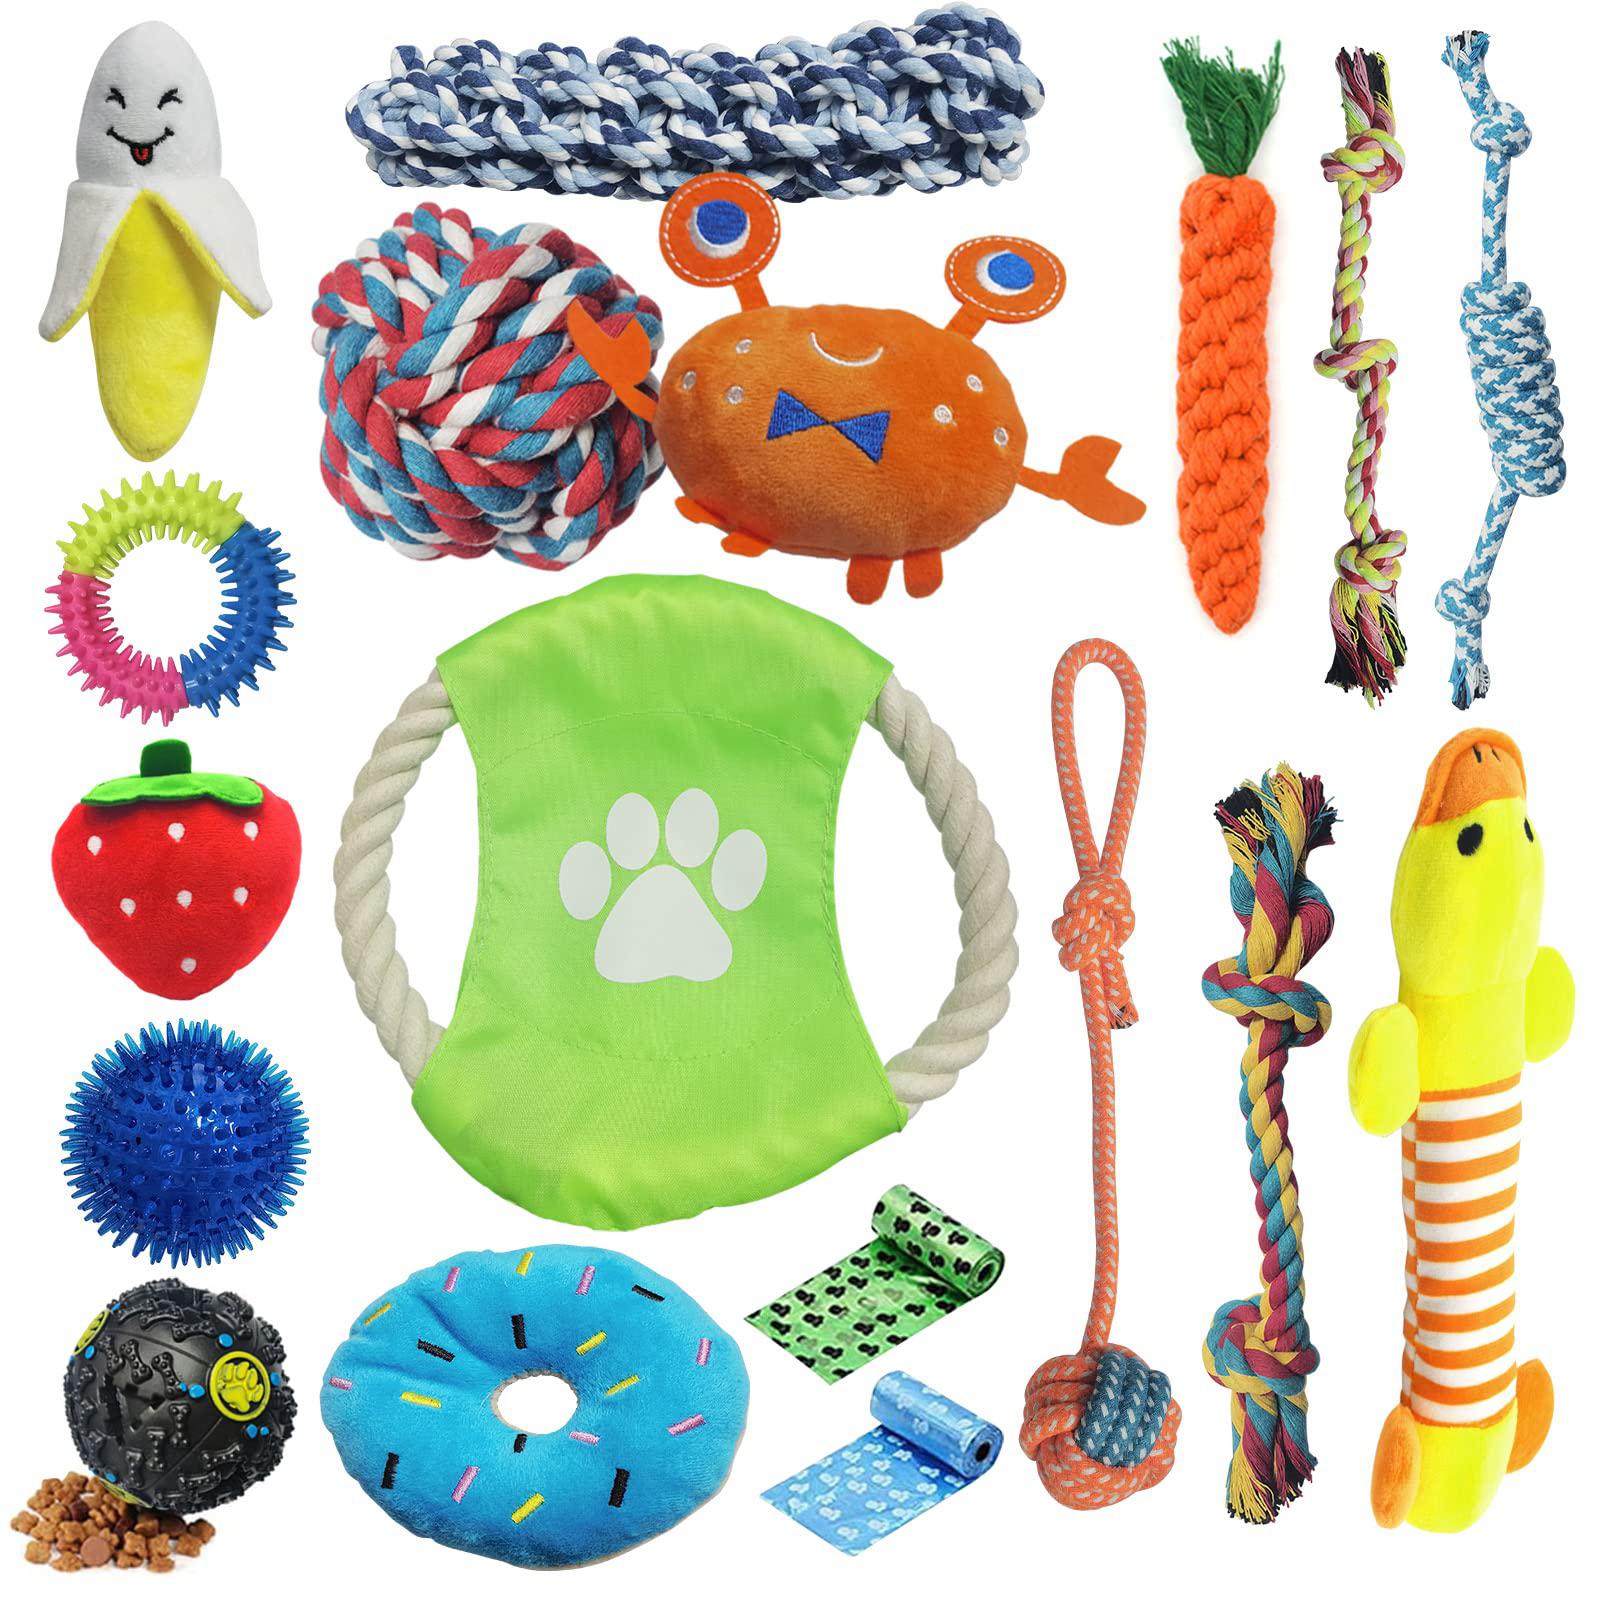 Chew toys for puppies teething small dogs/| 18 Pack Dog Teeth Cleaning Chew  Toys/ Puppy Chew Toys/ Puppy Teething Toys including Puppy Chews, Rope Dog